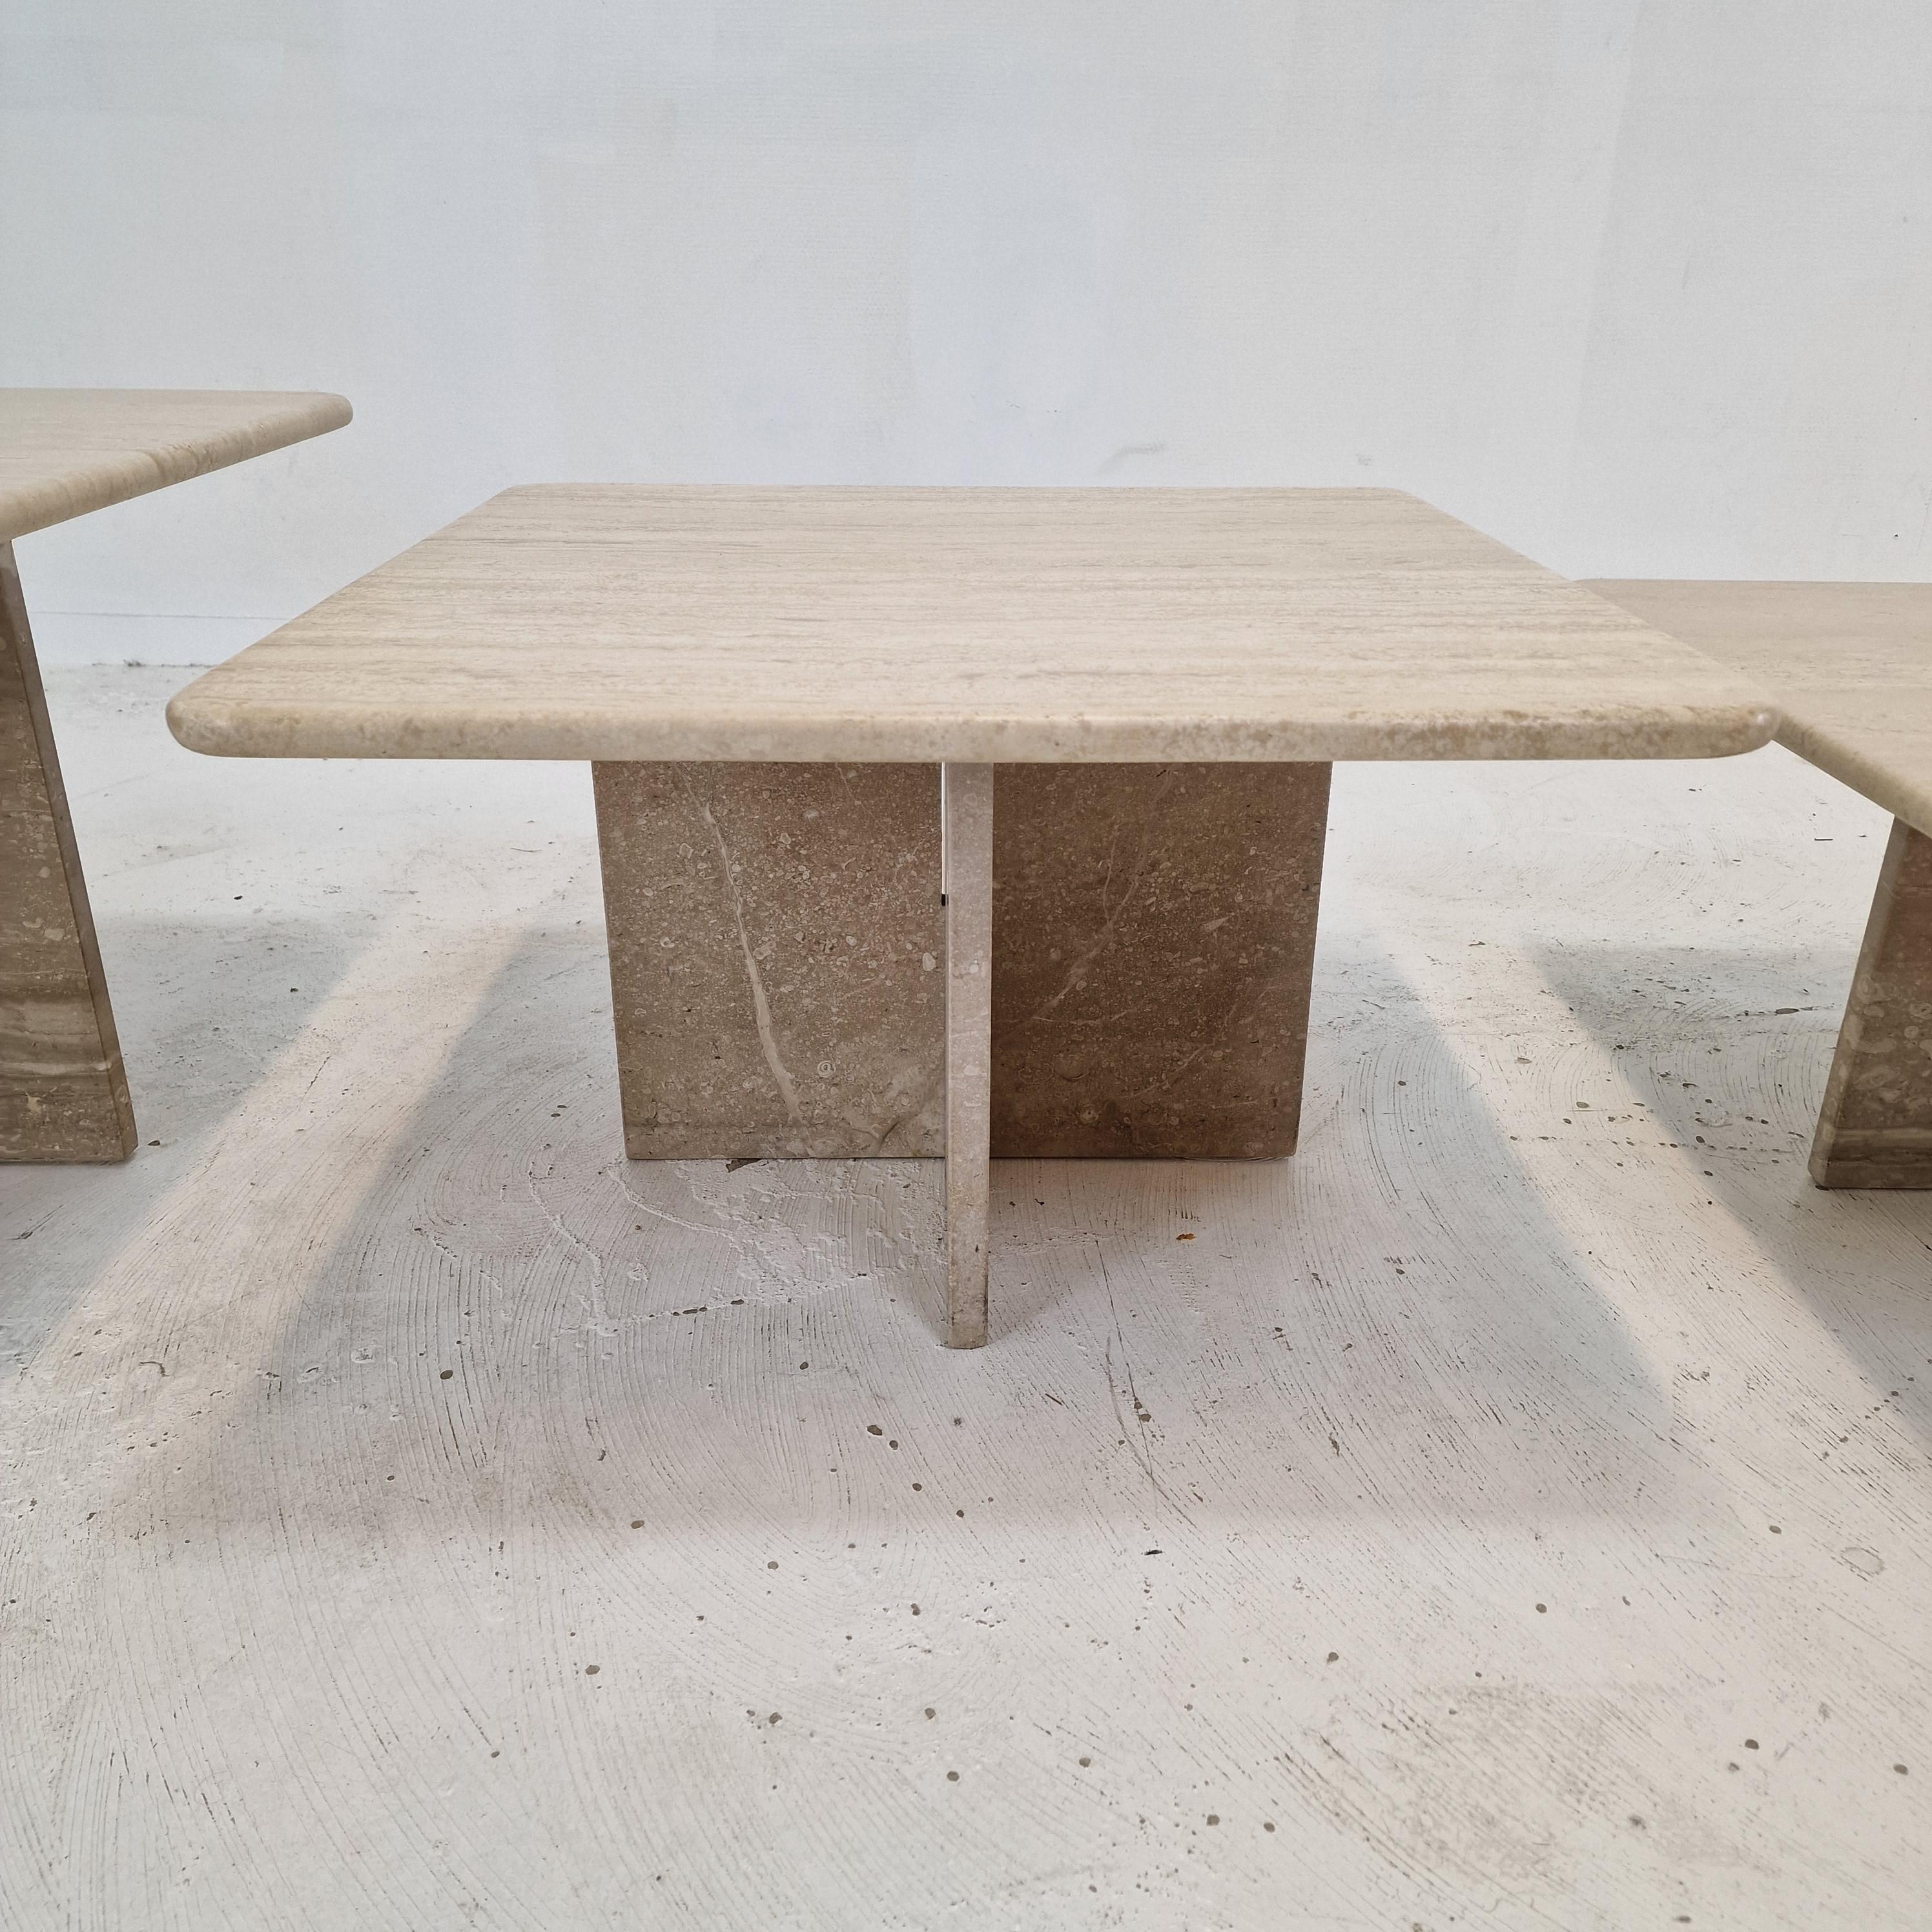 Set of 3 Italian Travertine Coffee or Side Tables, 1990s For Sale 6